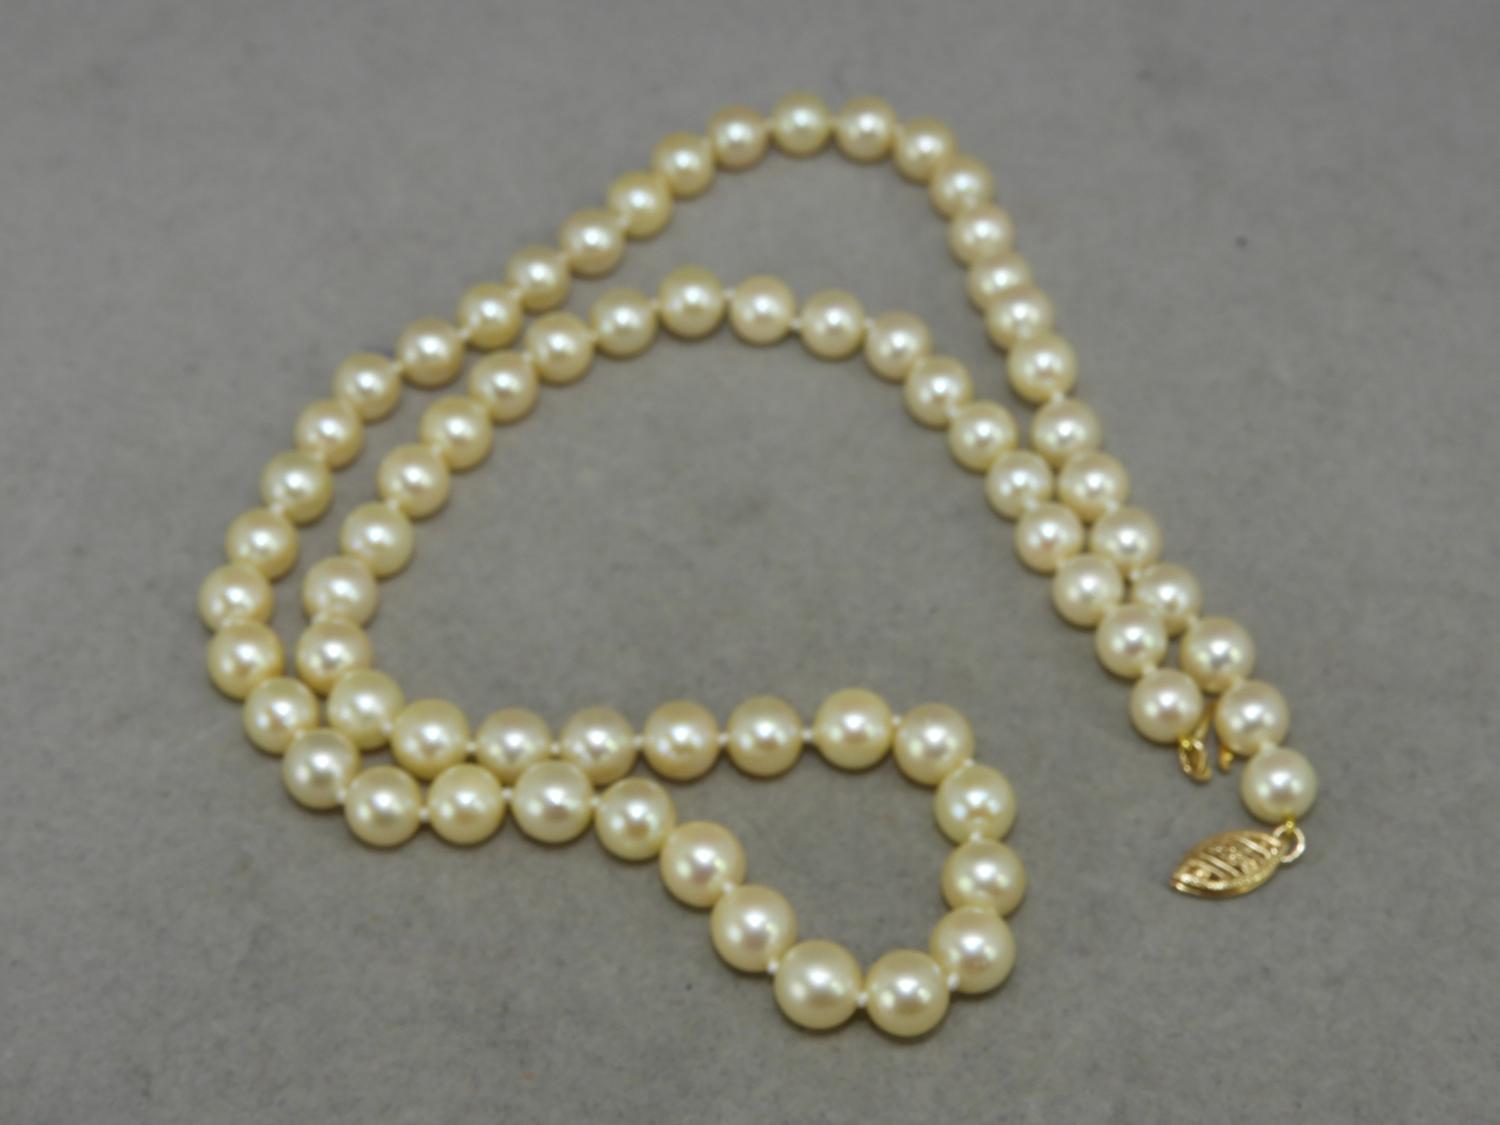 Murrays Auctioneers - Lot 60: Pearl necklace, 6.5-7mm, with 14K gold ...